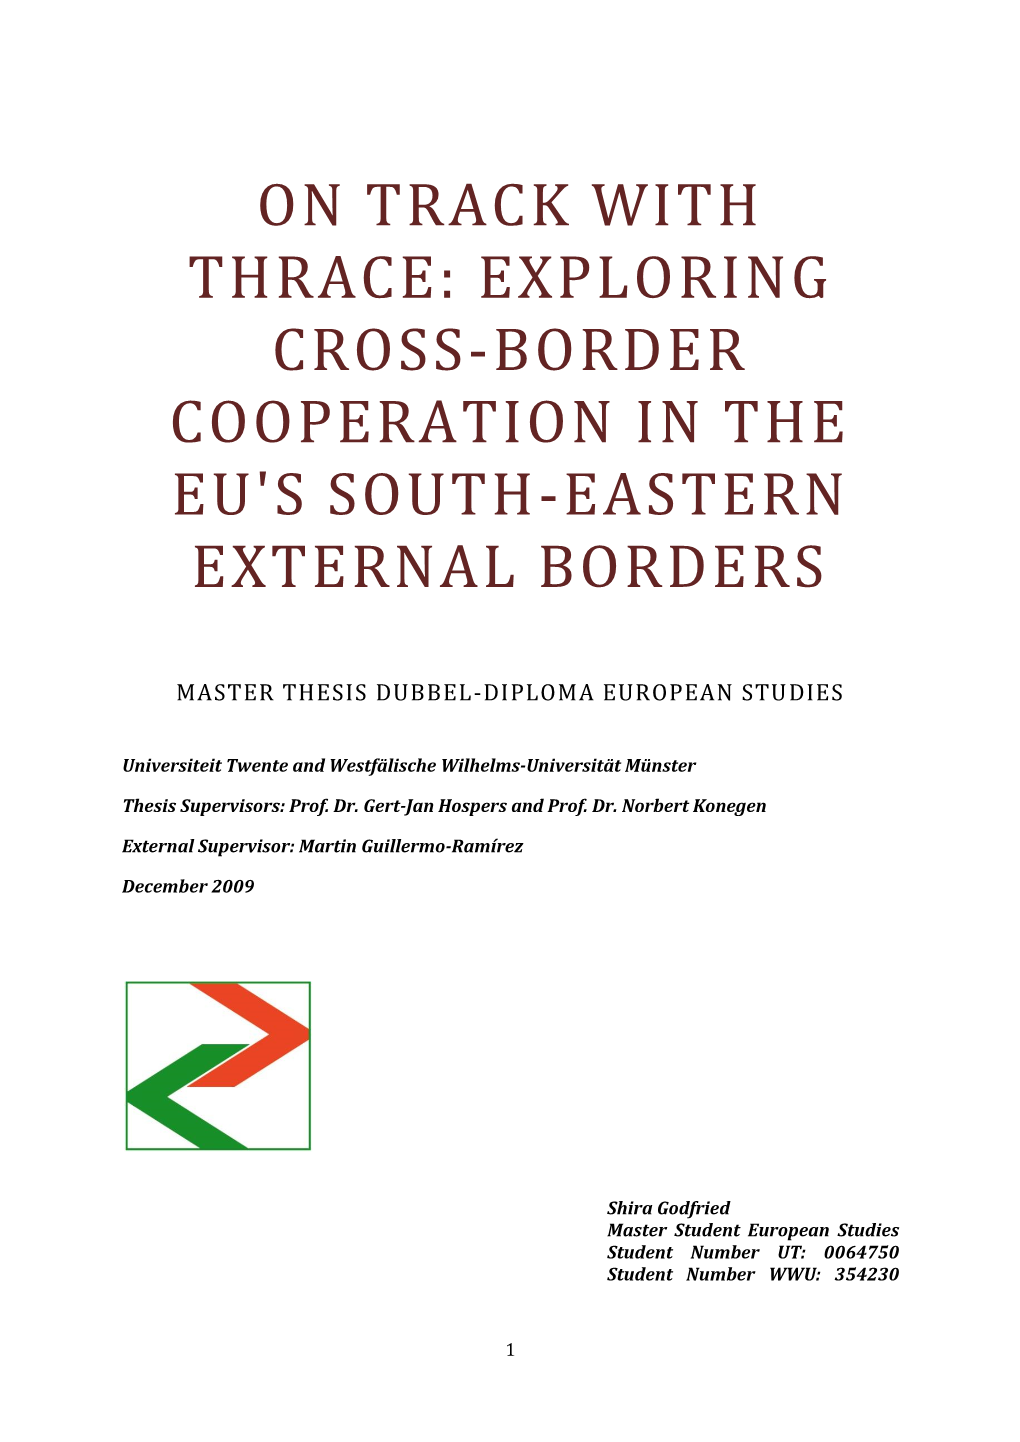 On Track with Thrace: Exploring Cross-Border Cooperation in the Eu's South-Eastern External Borders